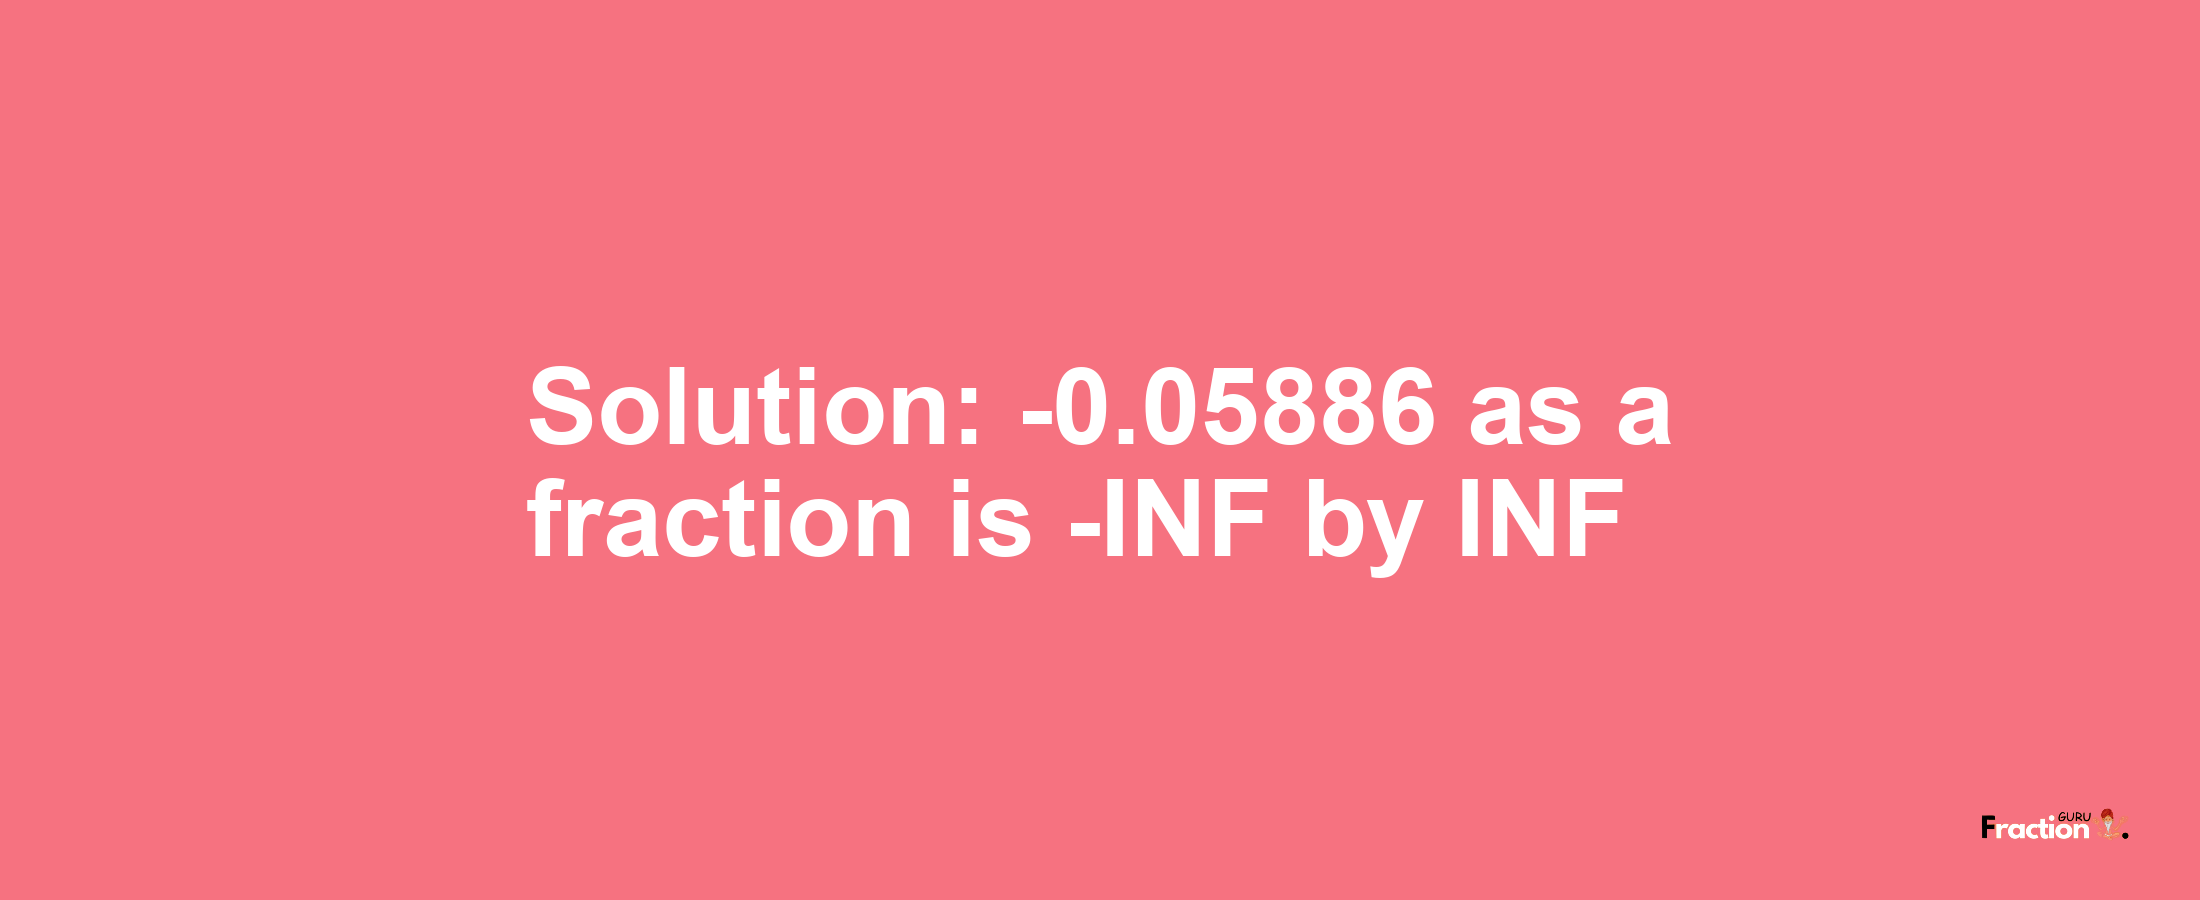 Solution:-0.05886 as a fraction is -INF/INF